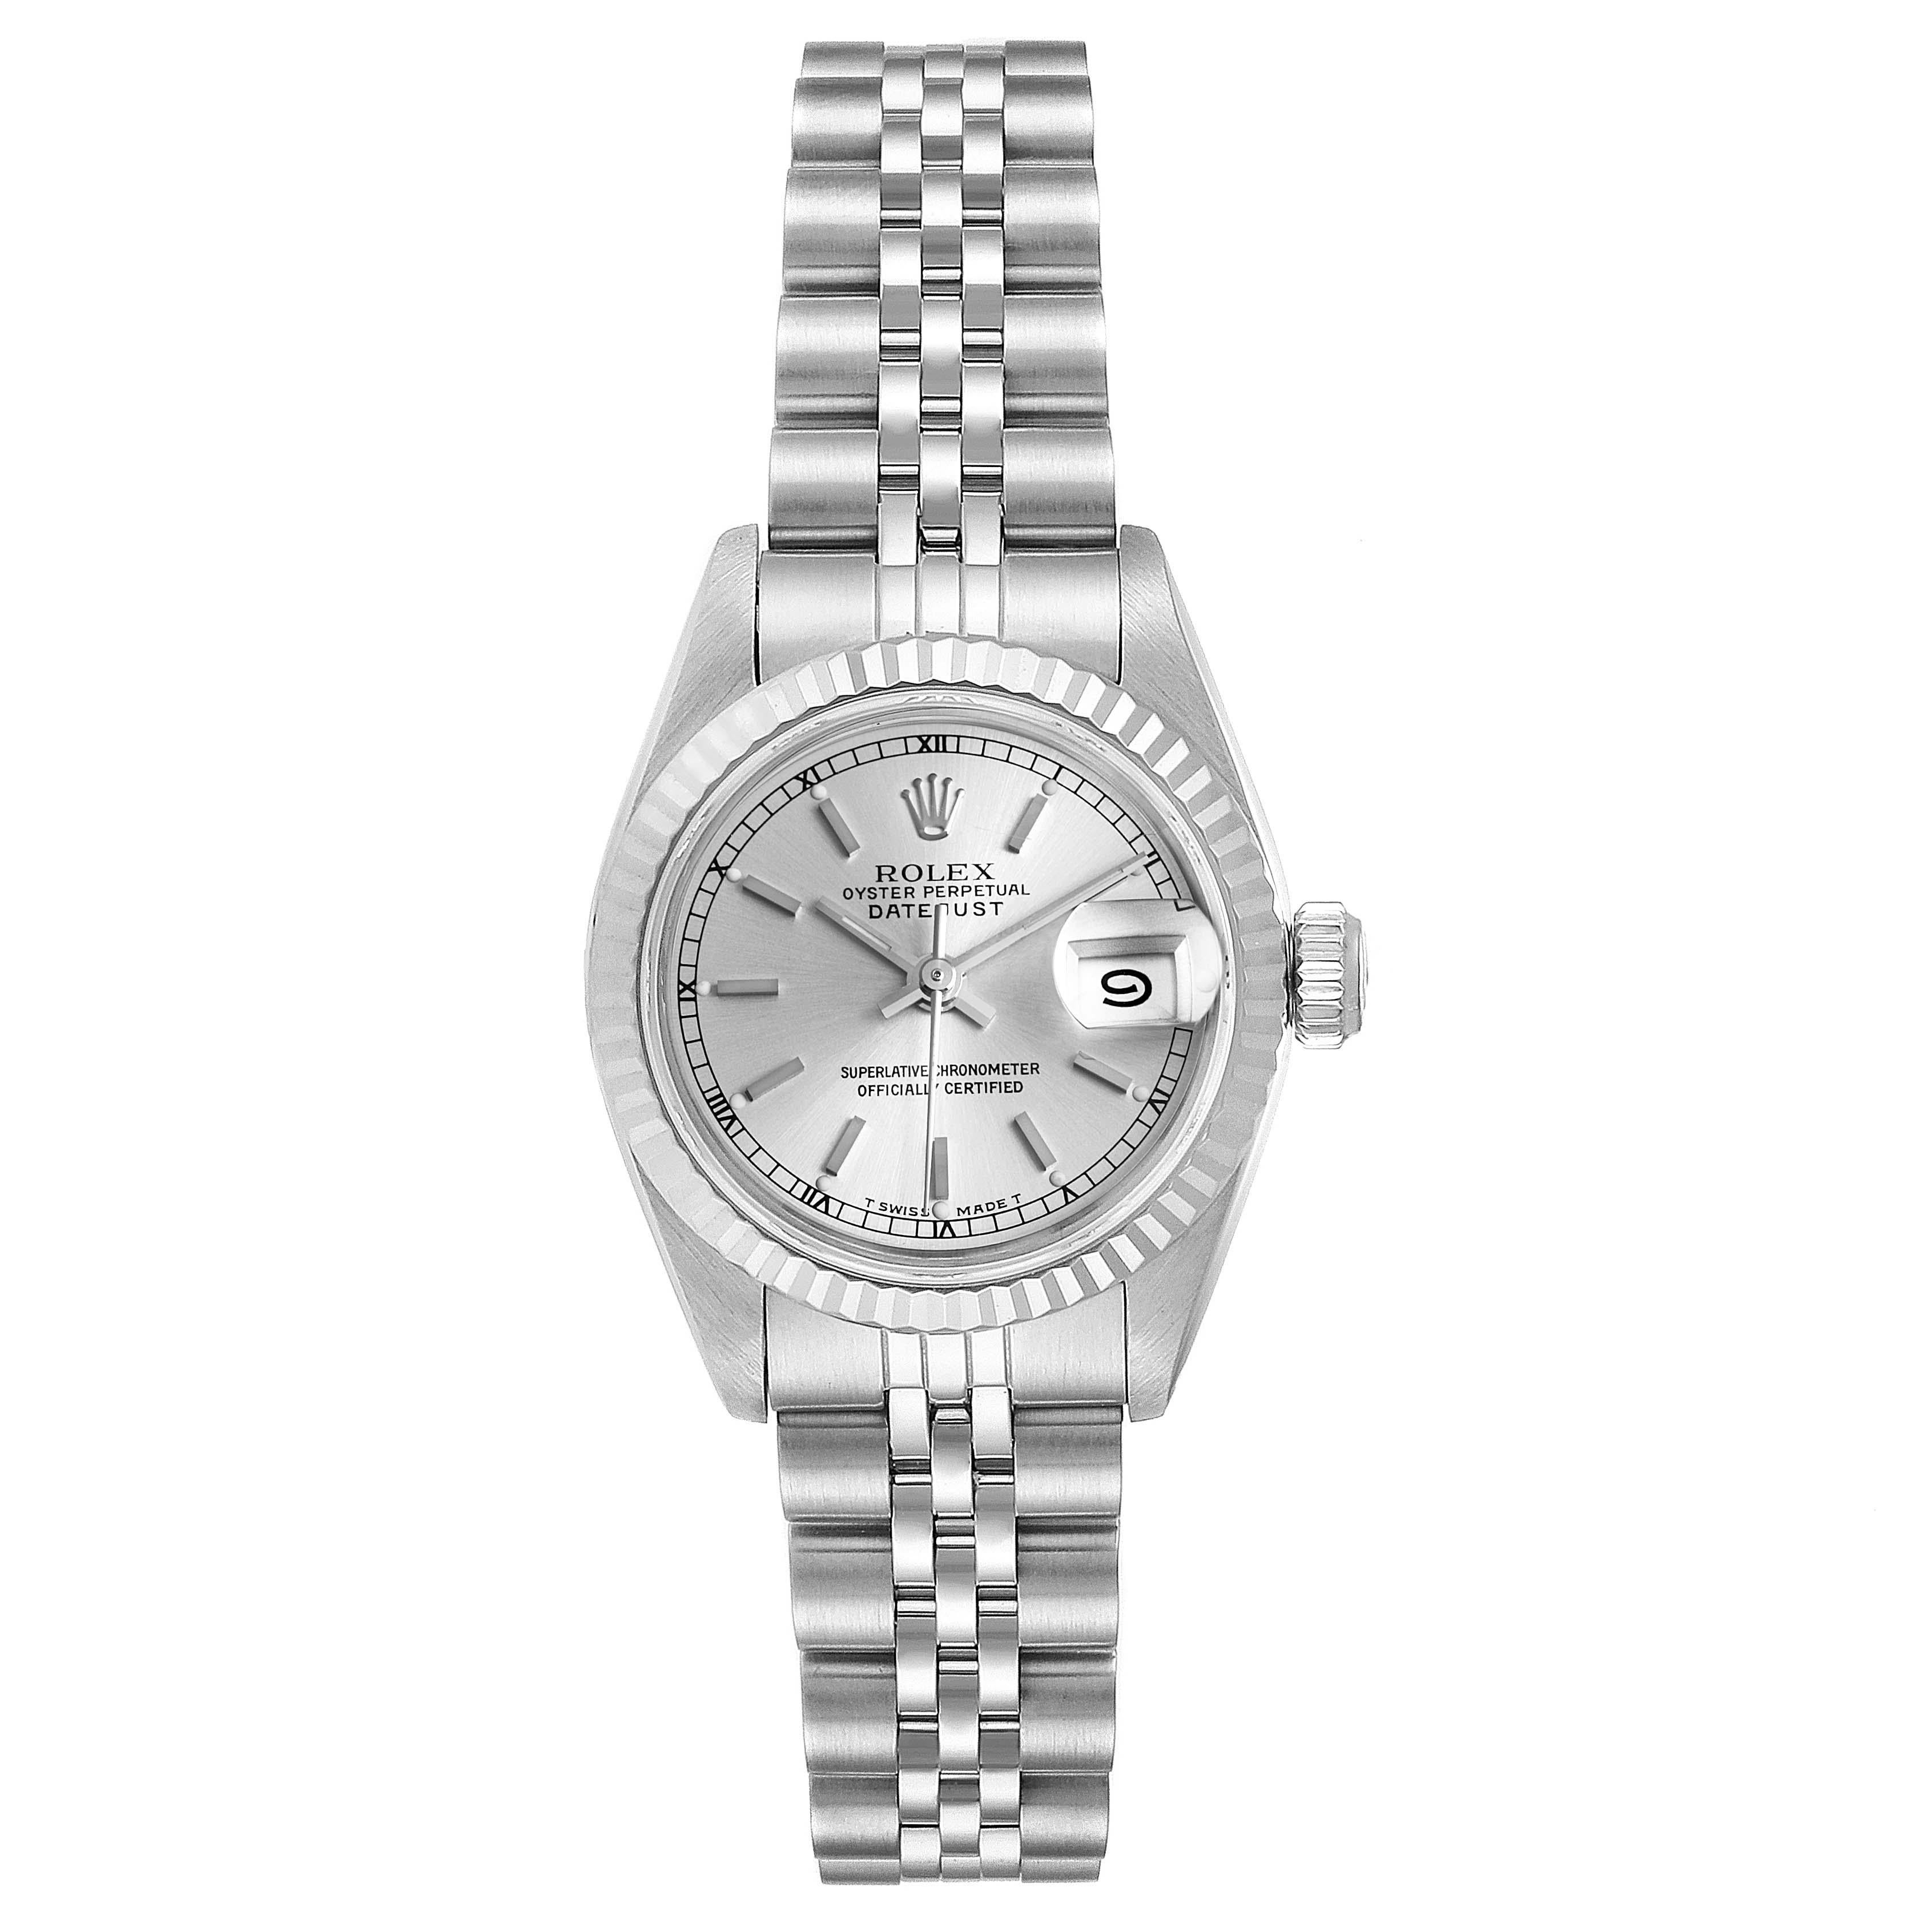 Rolex Datejust Steel White Gold Ladies Watch 69174 Box Papers. Officially certified chronometer self-winding movement. Stainless steel oyster case 26 mm in diameter. Rolex logo on a crown. 18k white gold fluted bezel. Scratch resistant sapphire